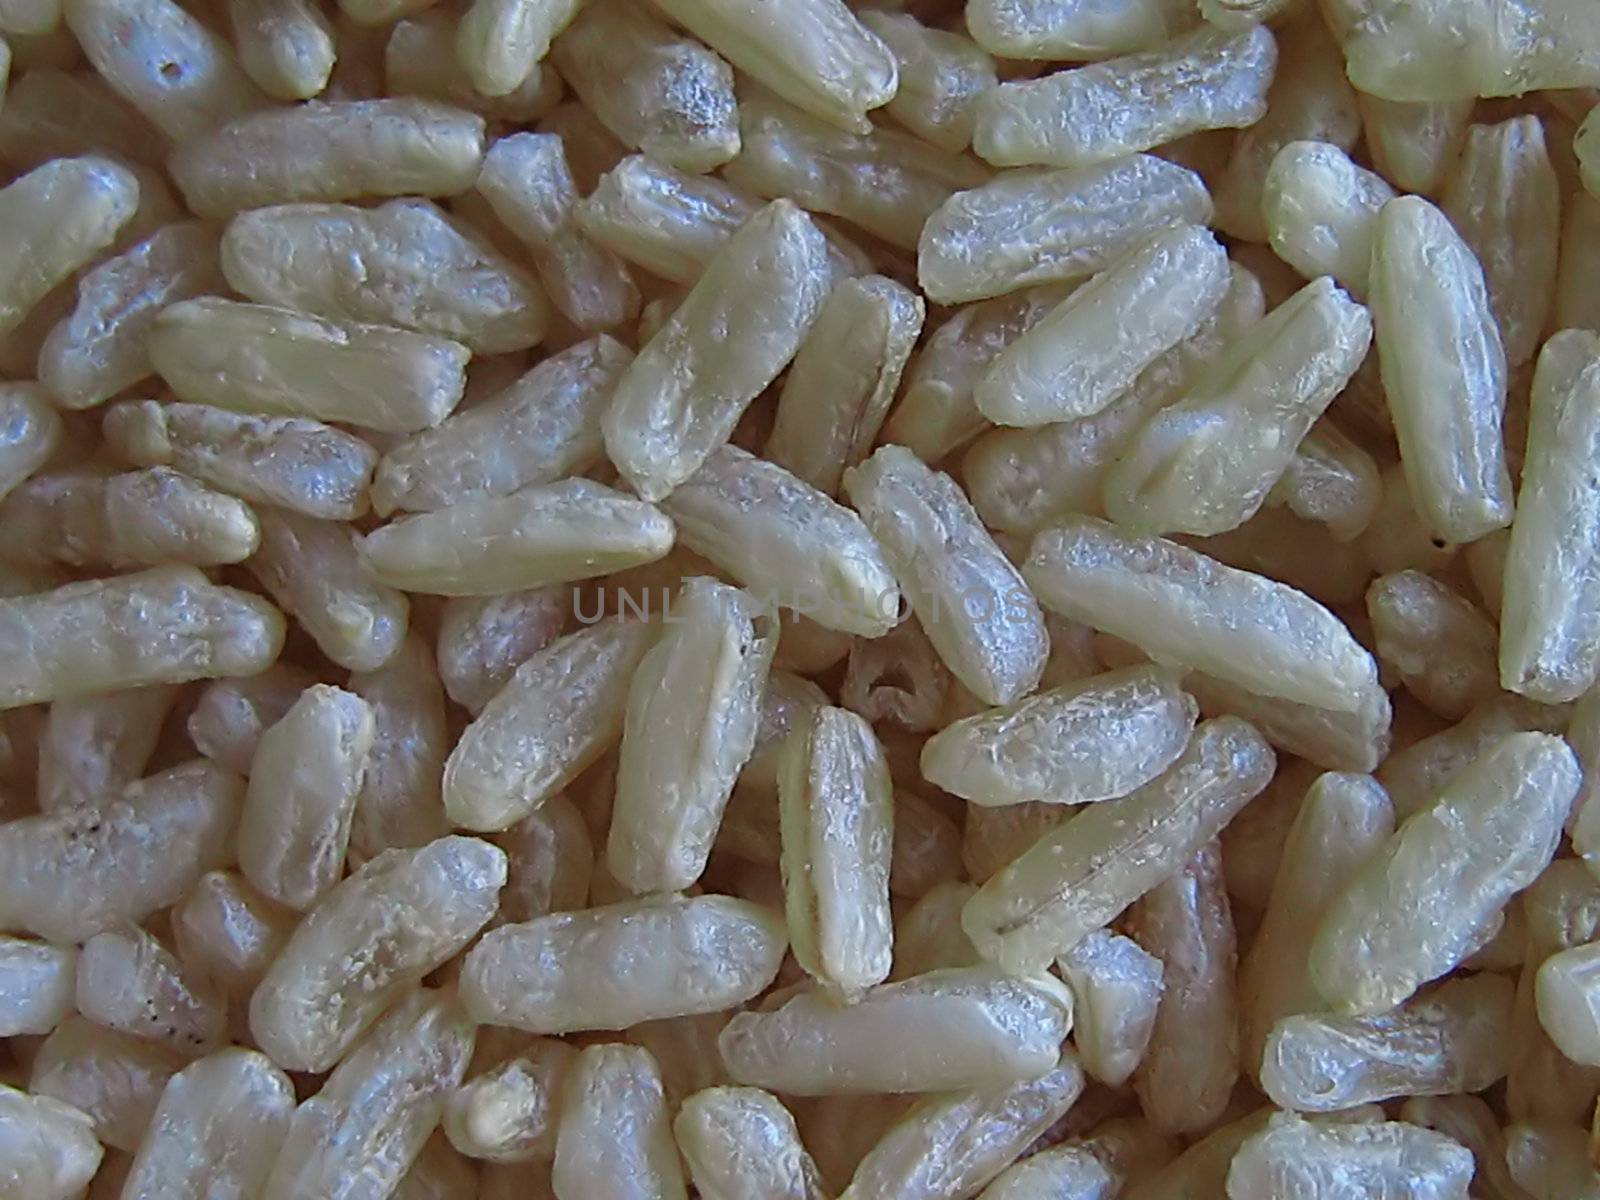 A photograph of uncooked brown rice detailing its texture.